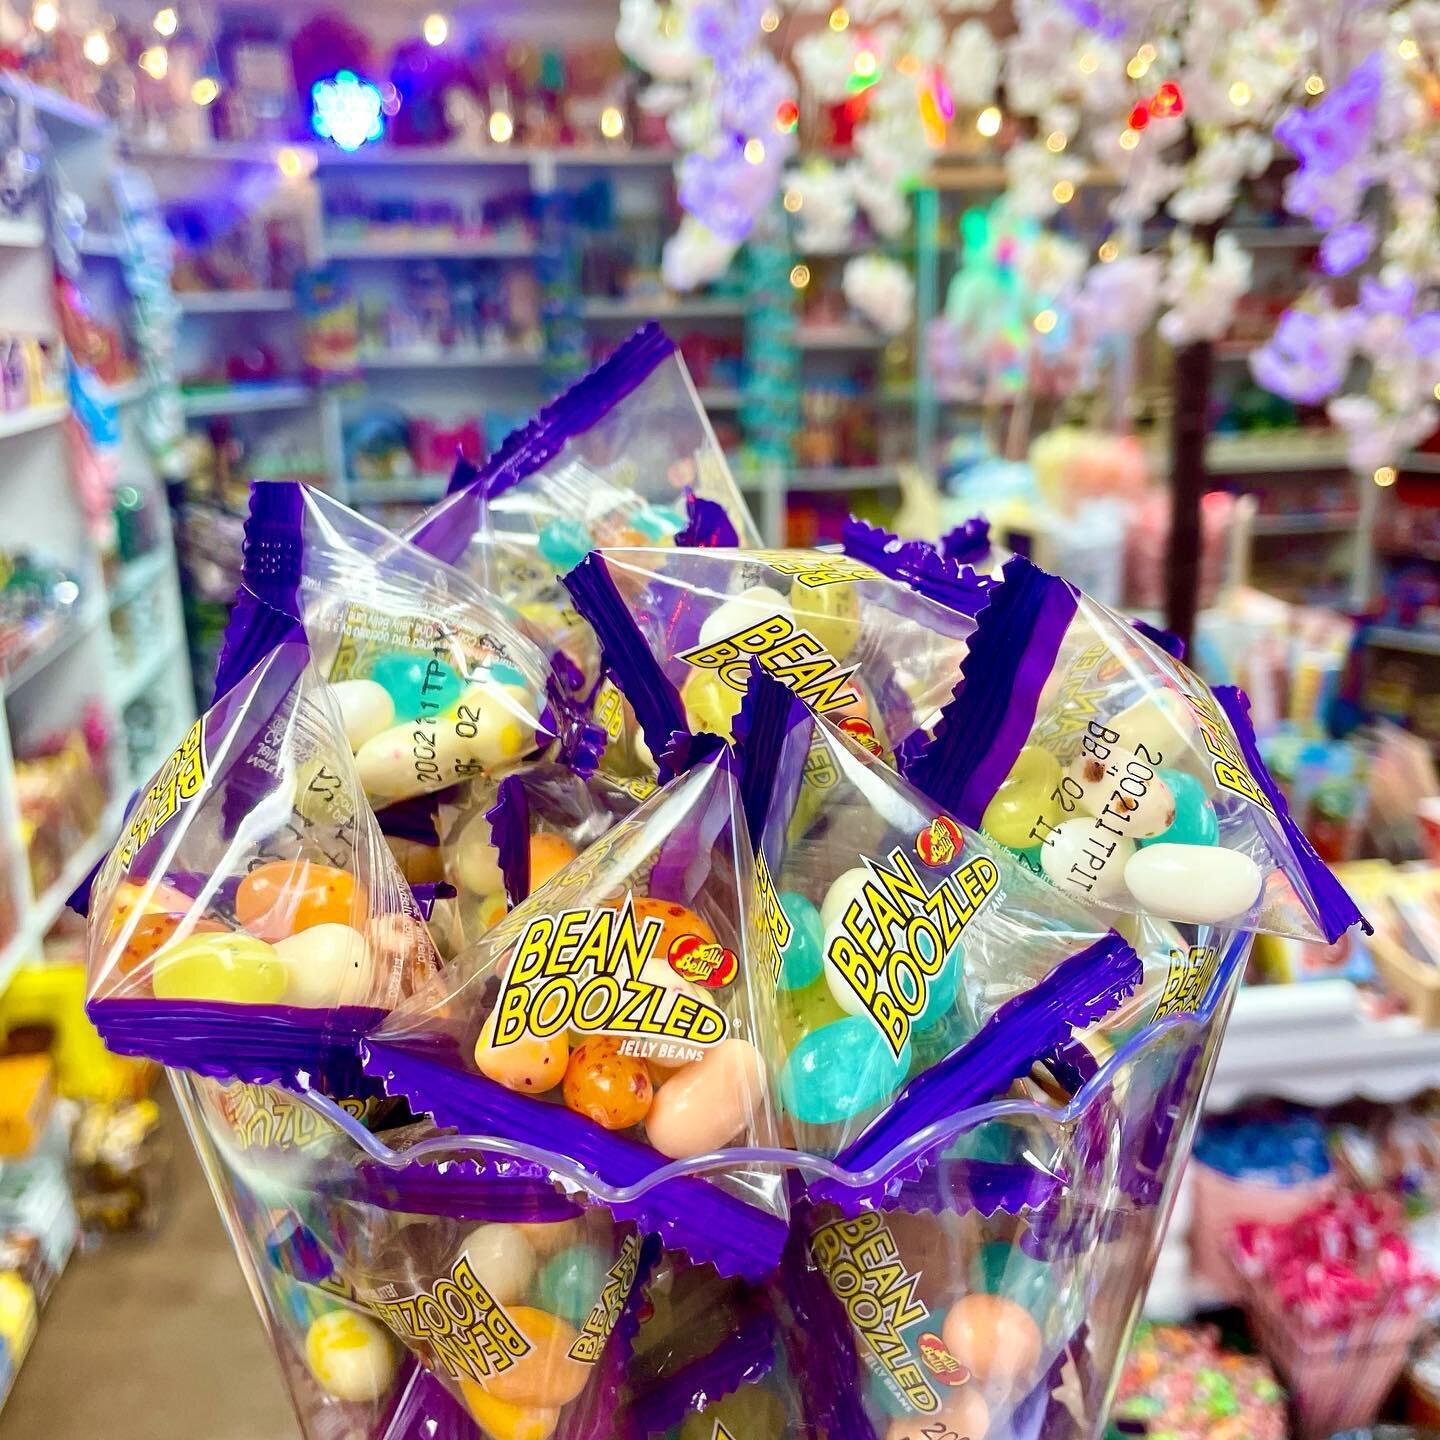 Small Packs with BIG Laughs!!! 
Do you Dare? Or Dare Someone Else? 
Maybe this time you Let the Kids find the Candy....?
Its 50/50 chance what it is but A Guaranteed Laugh Every Time!! 
We Are Open until 7pm Today!!
#TheCandyUnicornium #Candyshoppe #